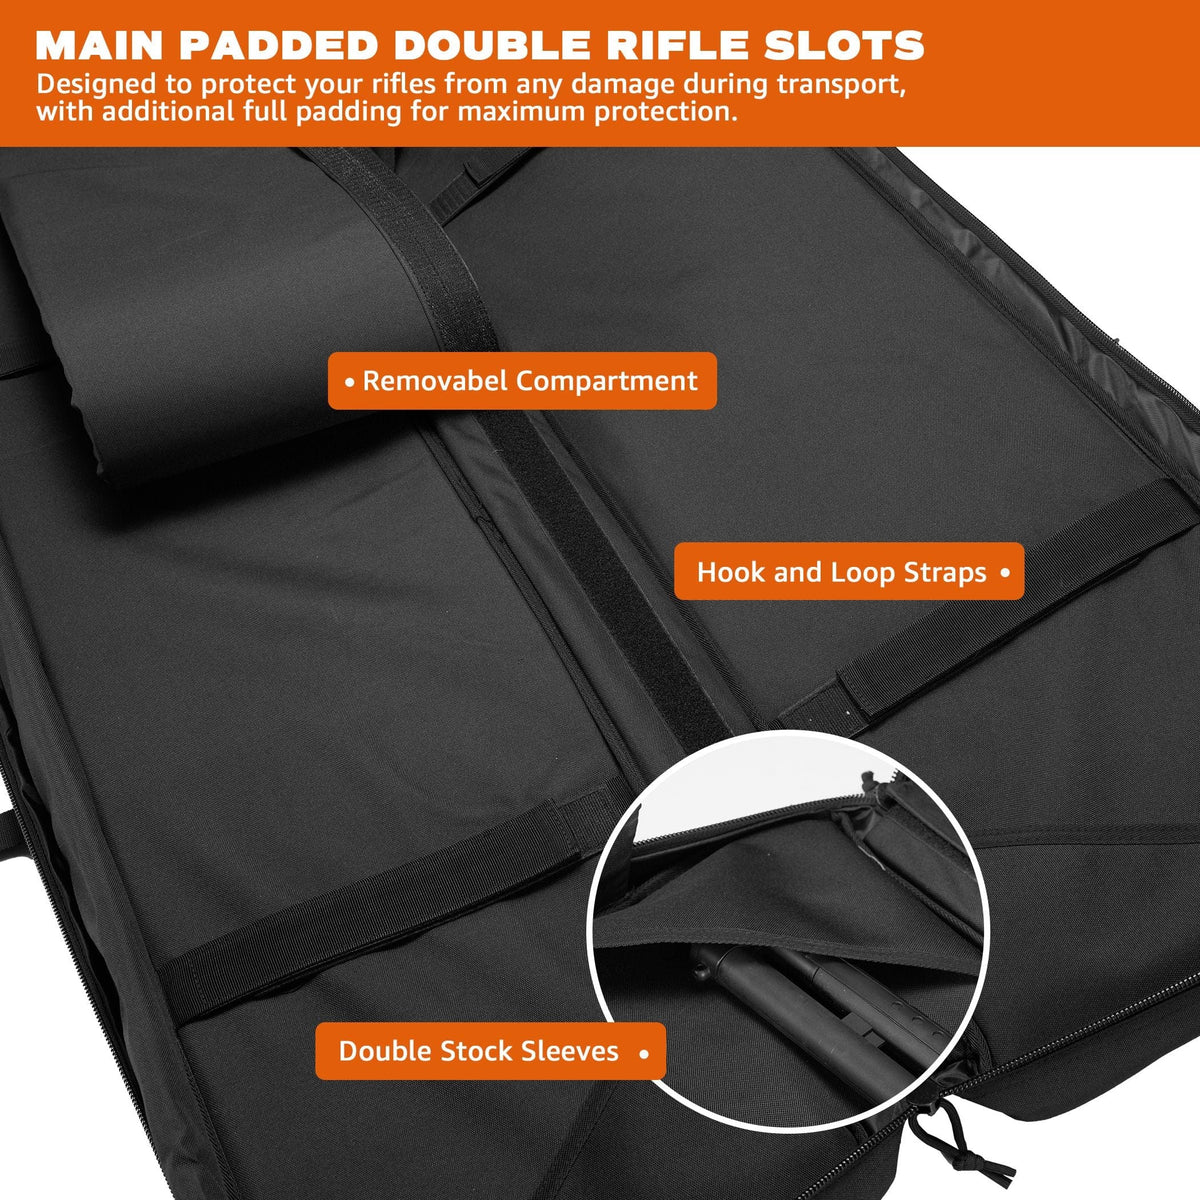 RPNB TD-4612 46" Double Rifle Backpack Armadillo Safe and Vault